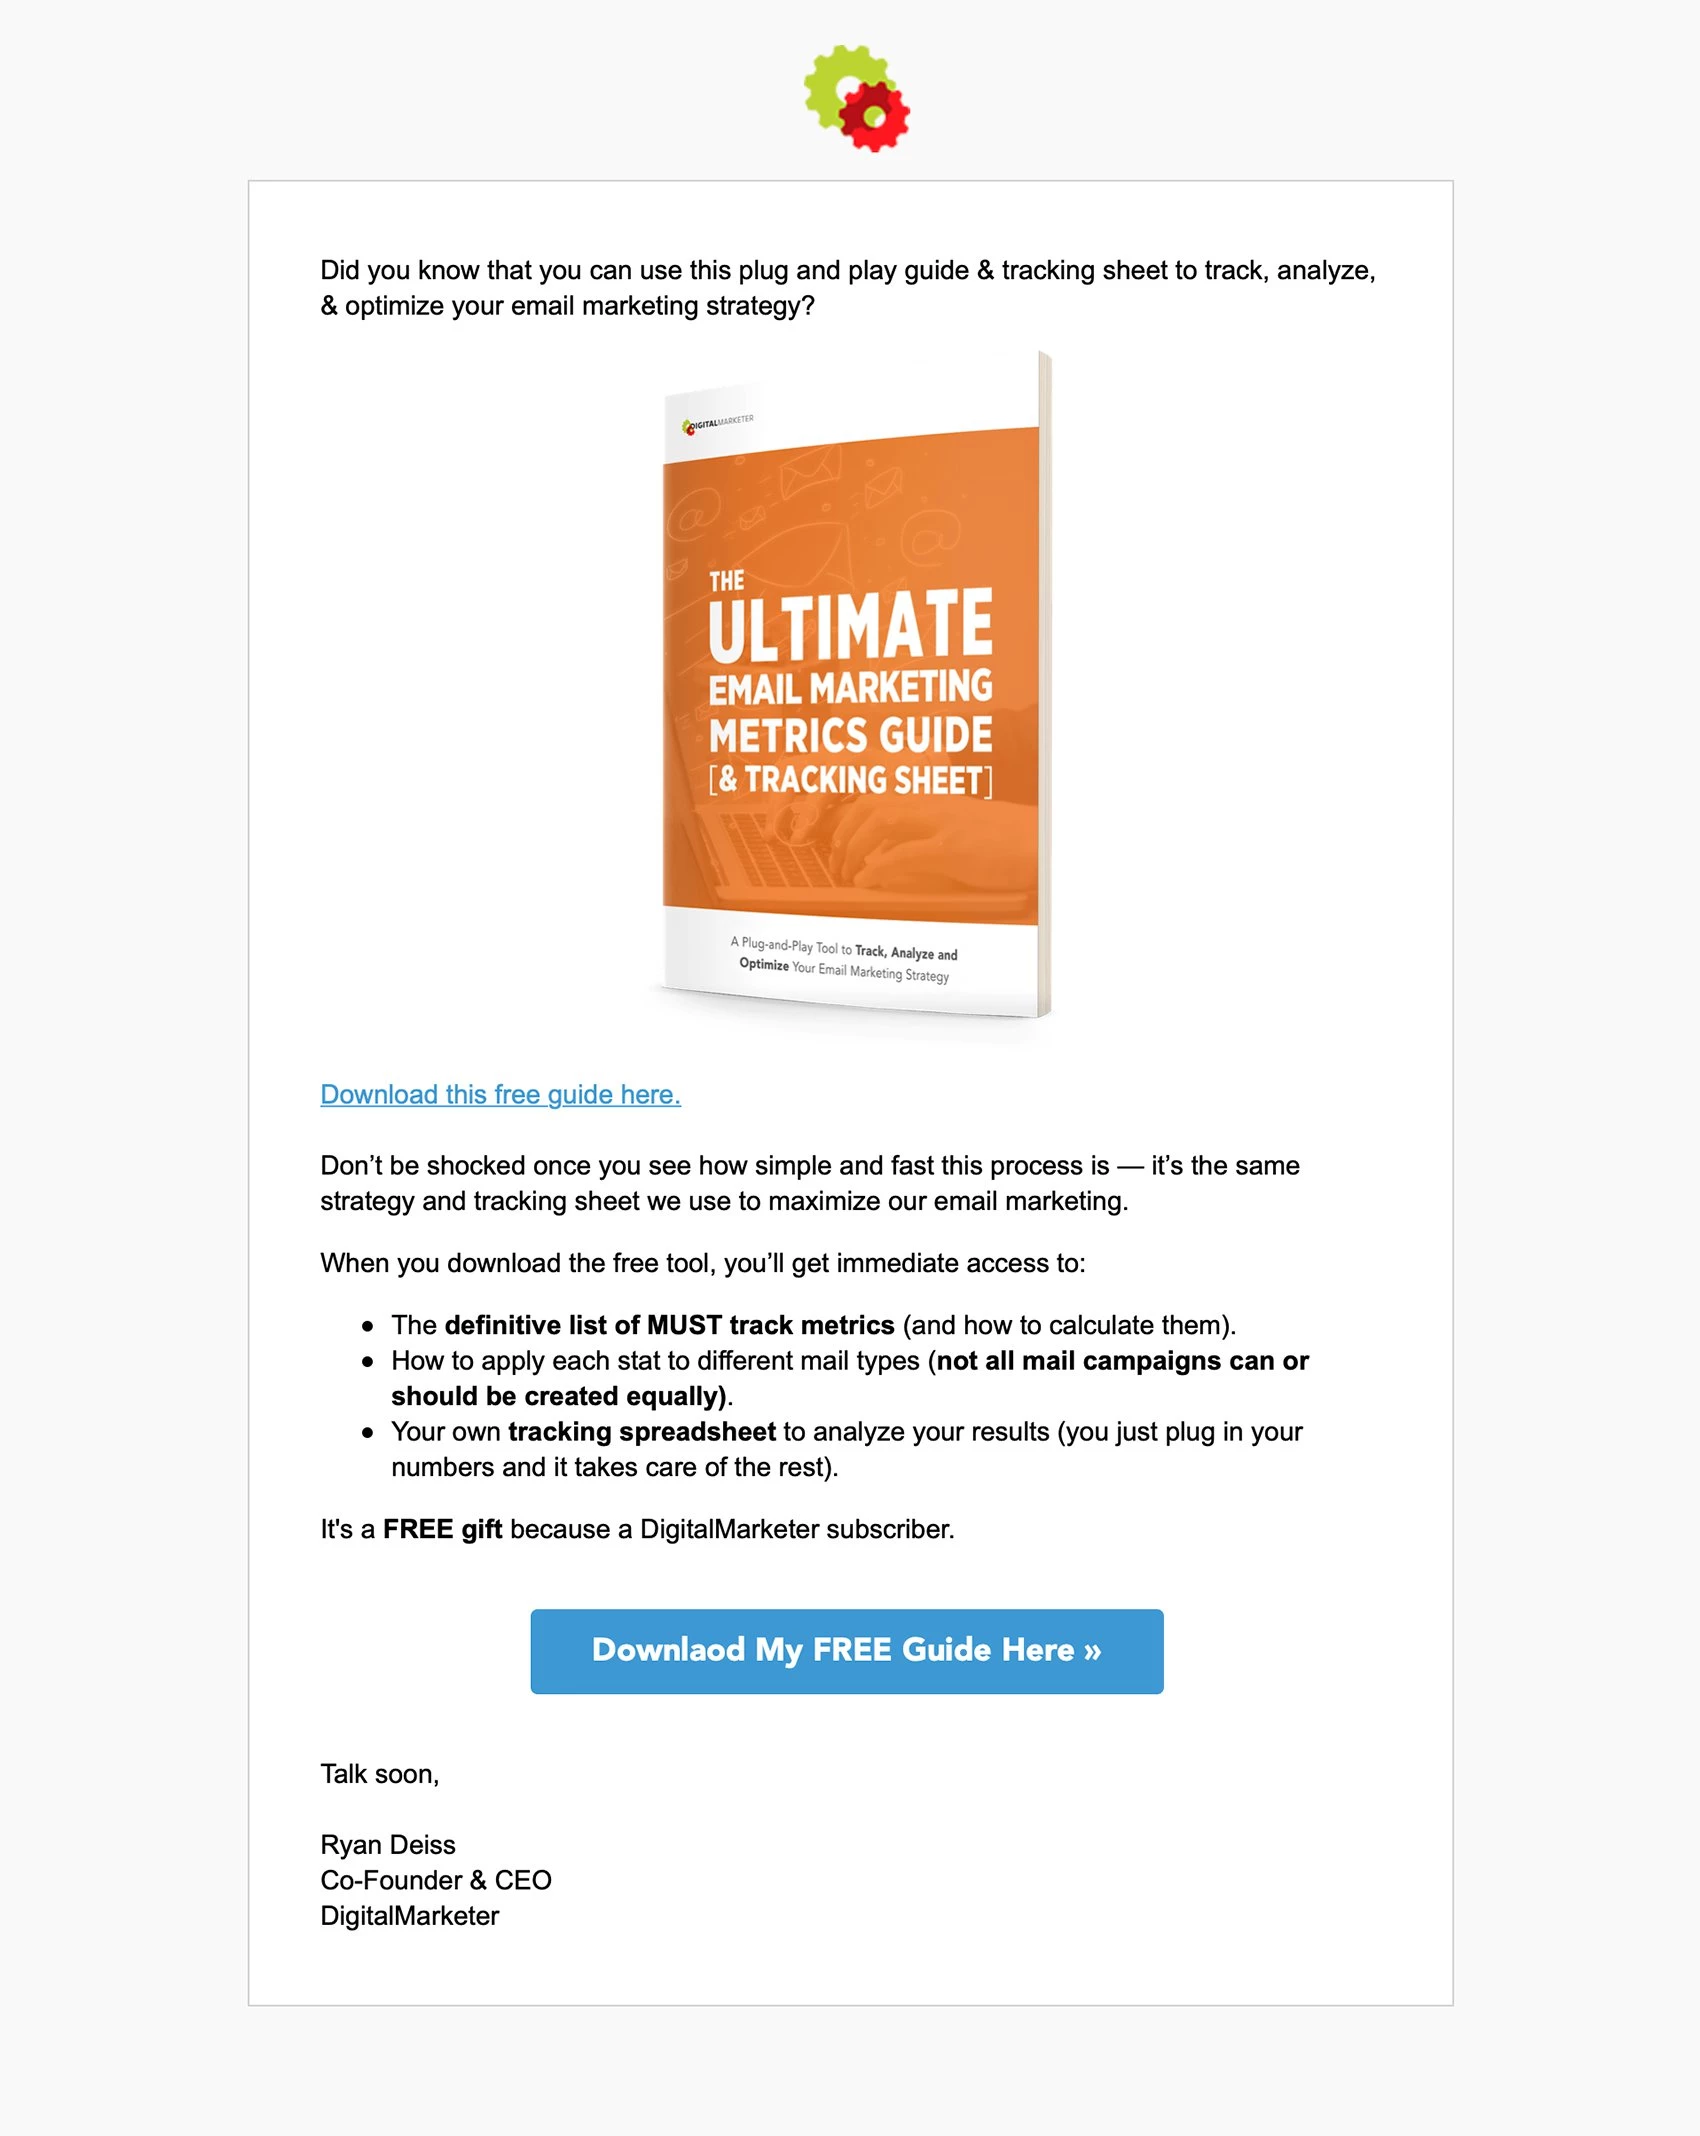 b2b email marketing example digitalmarketer download free guide